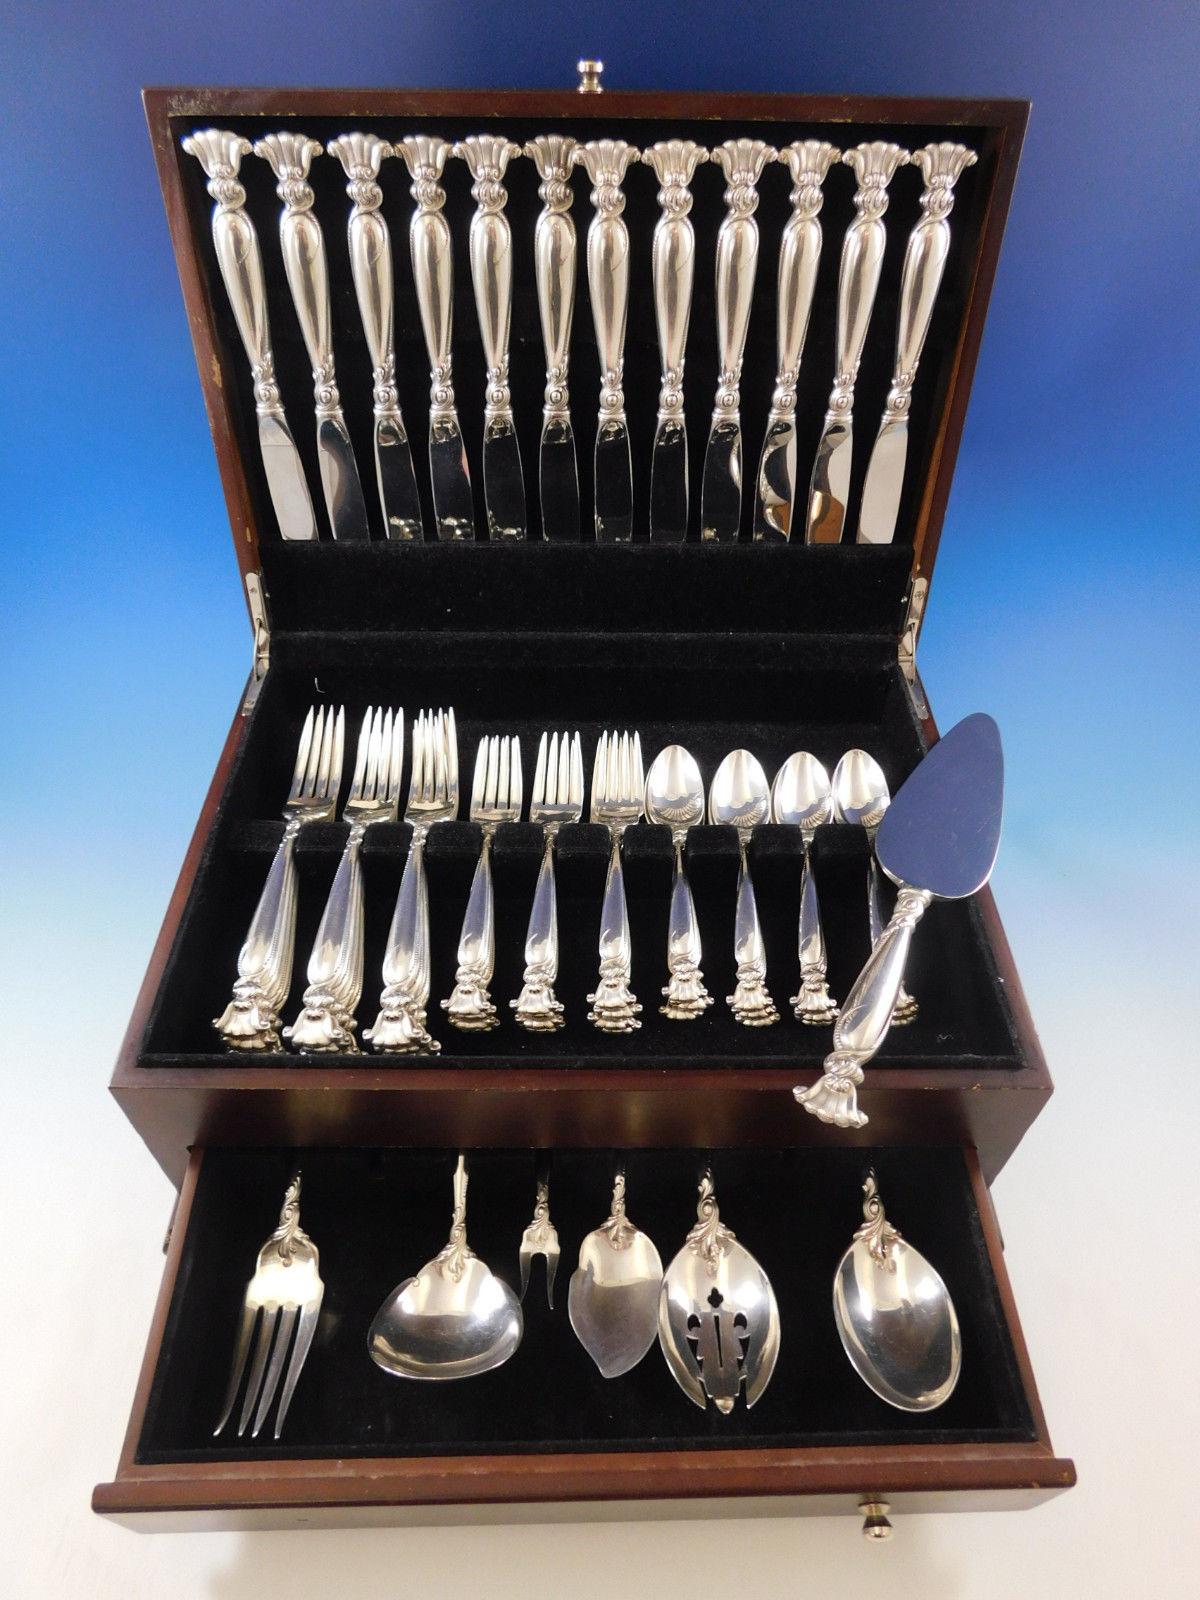 Exquisite dinner size romance of the sea by Wallace Sterling silver flatware set - 55 pieces. This set includes:

12 dinner size knives, 9 7/8